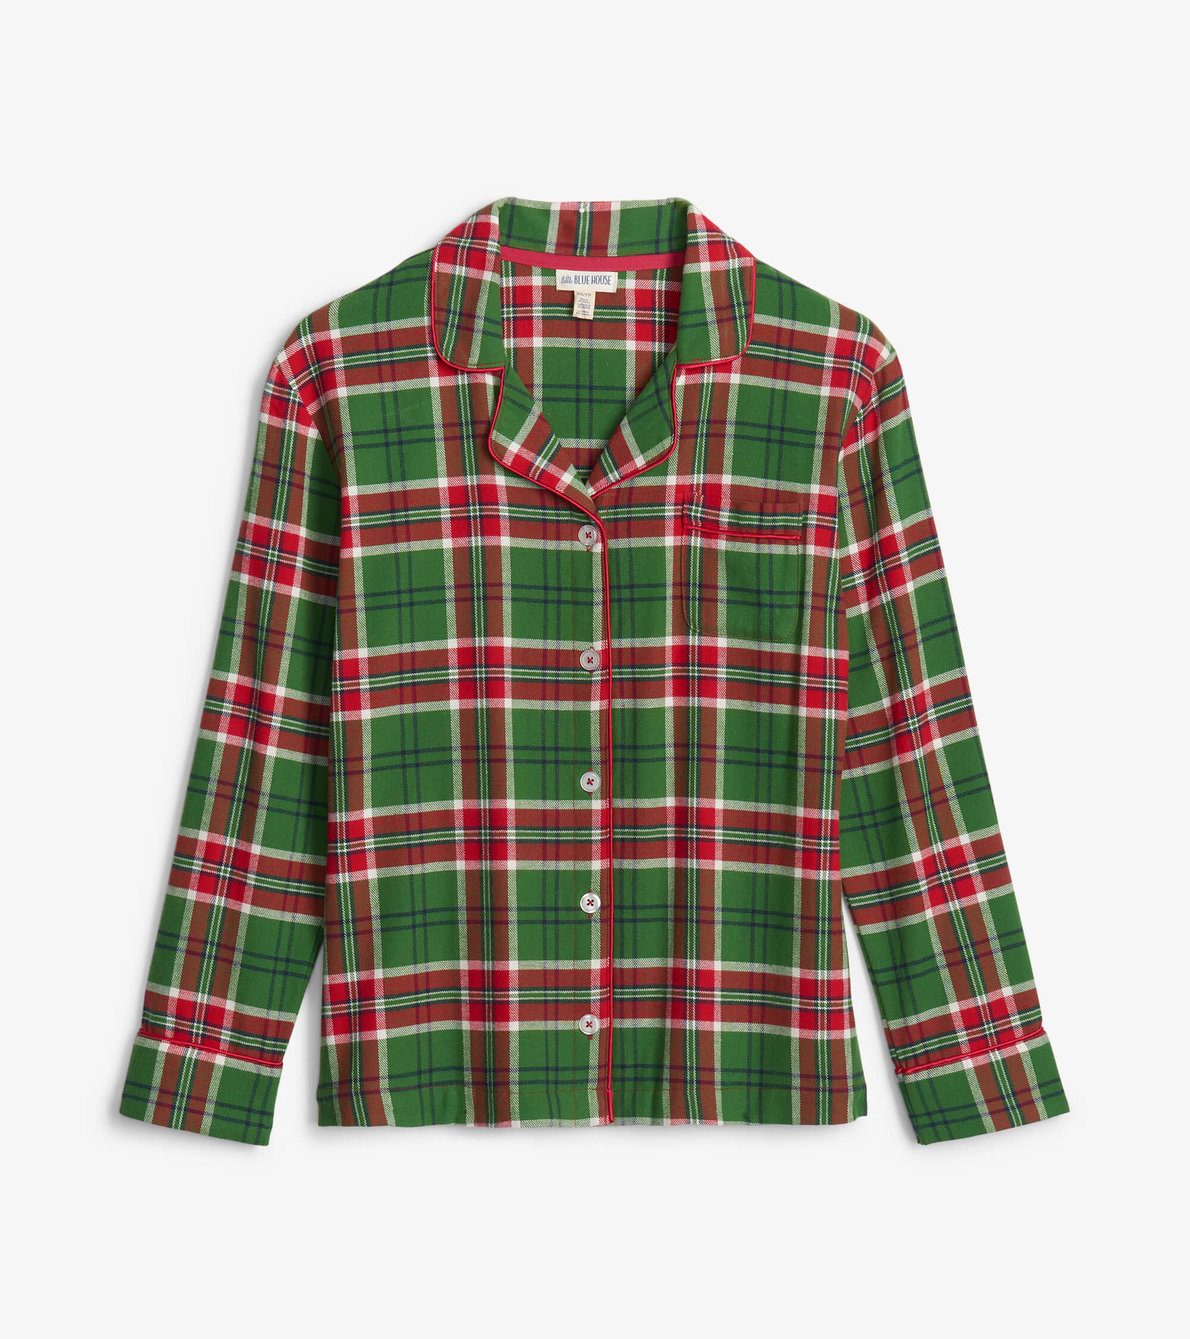 View larger image of Country Christmas Plaid Women's Flannel Pajama Set